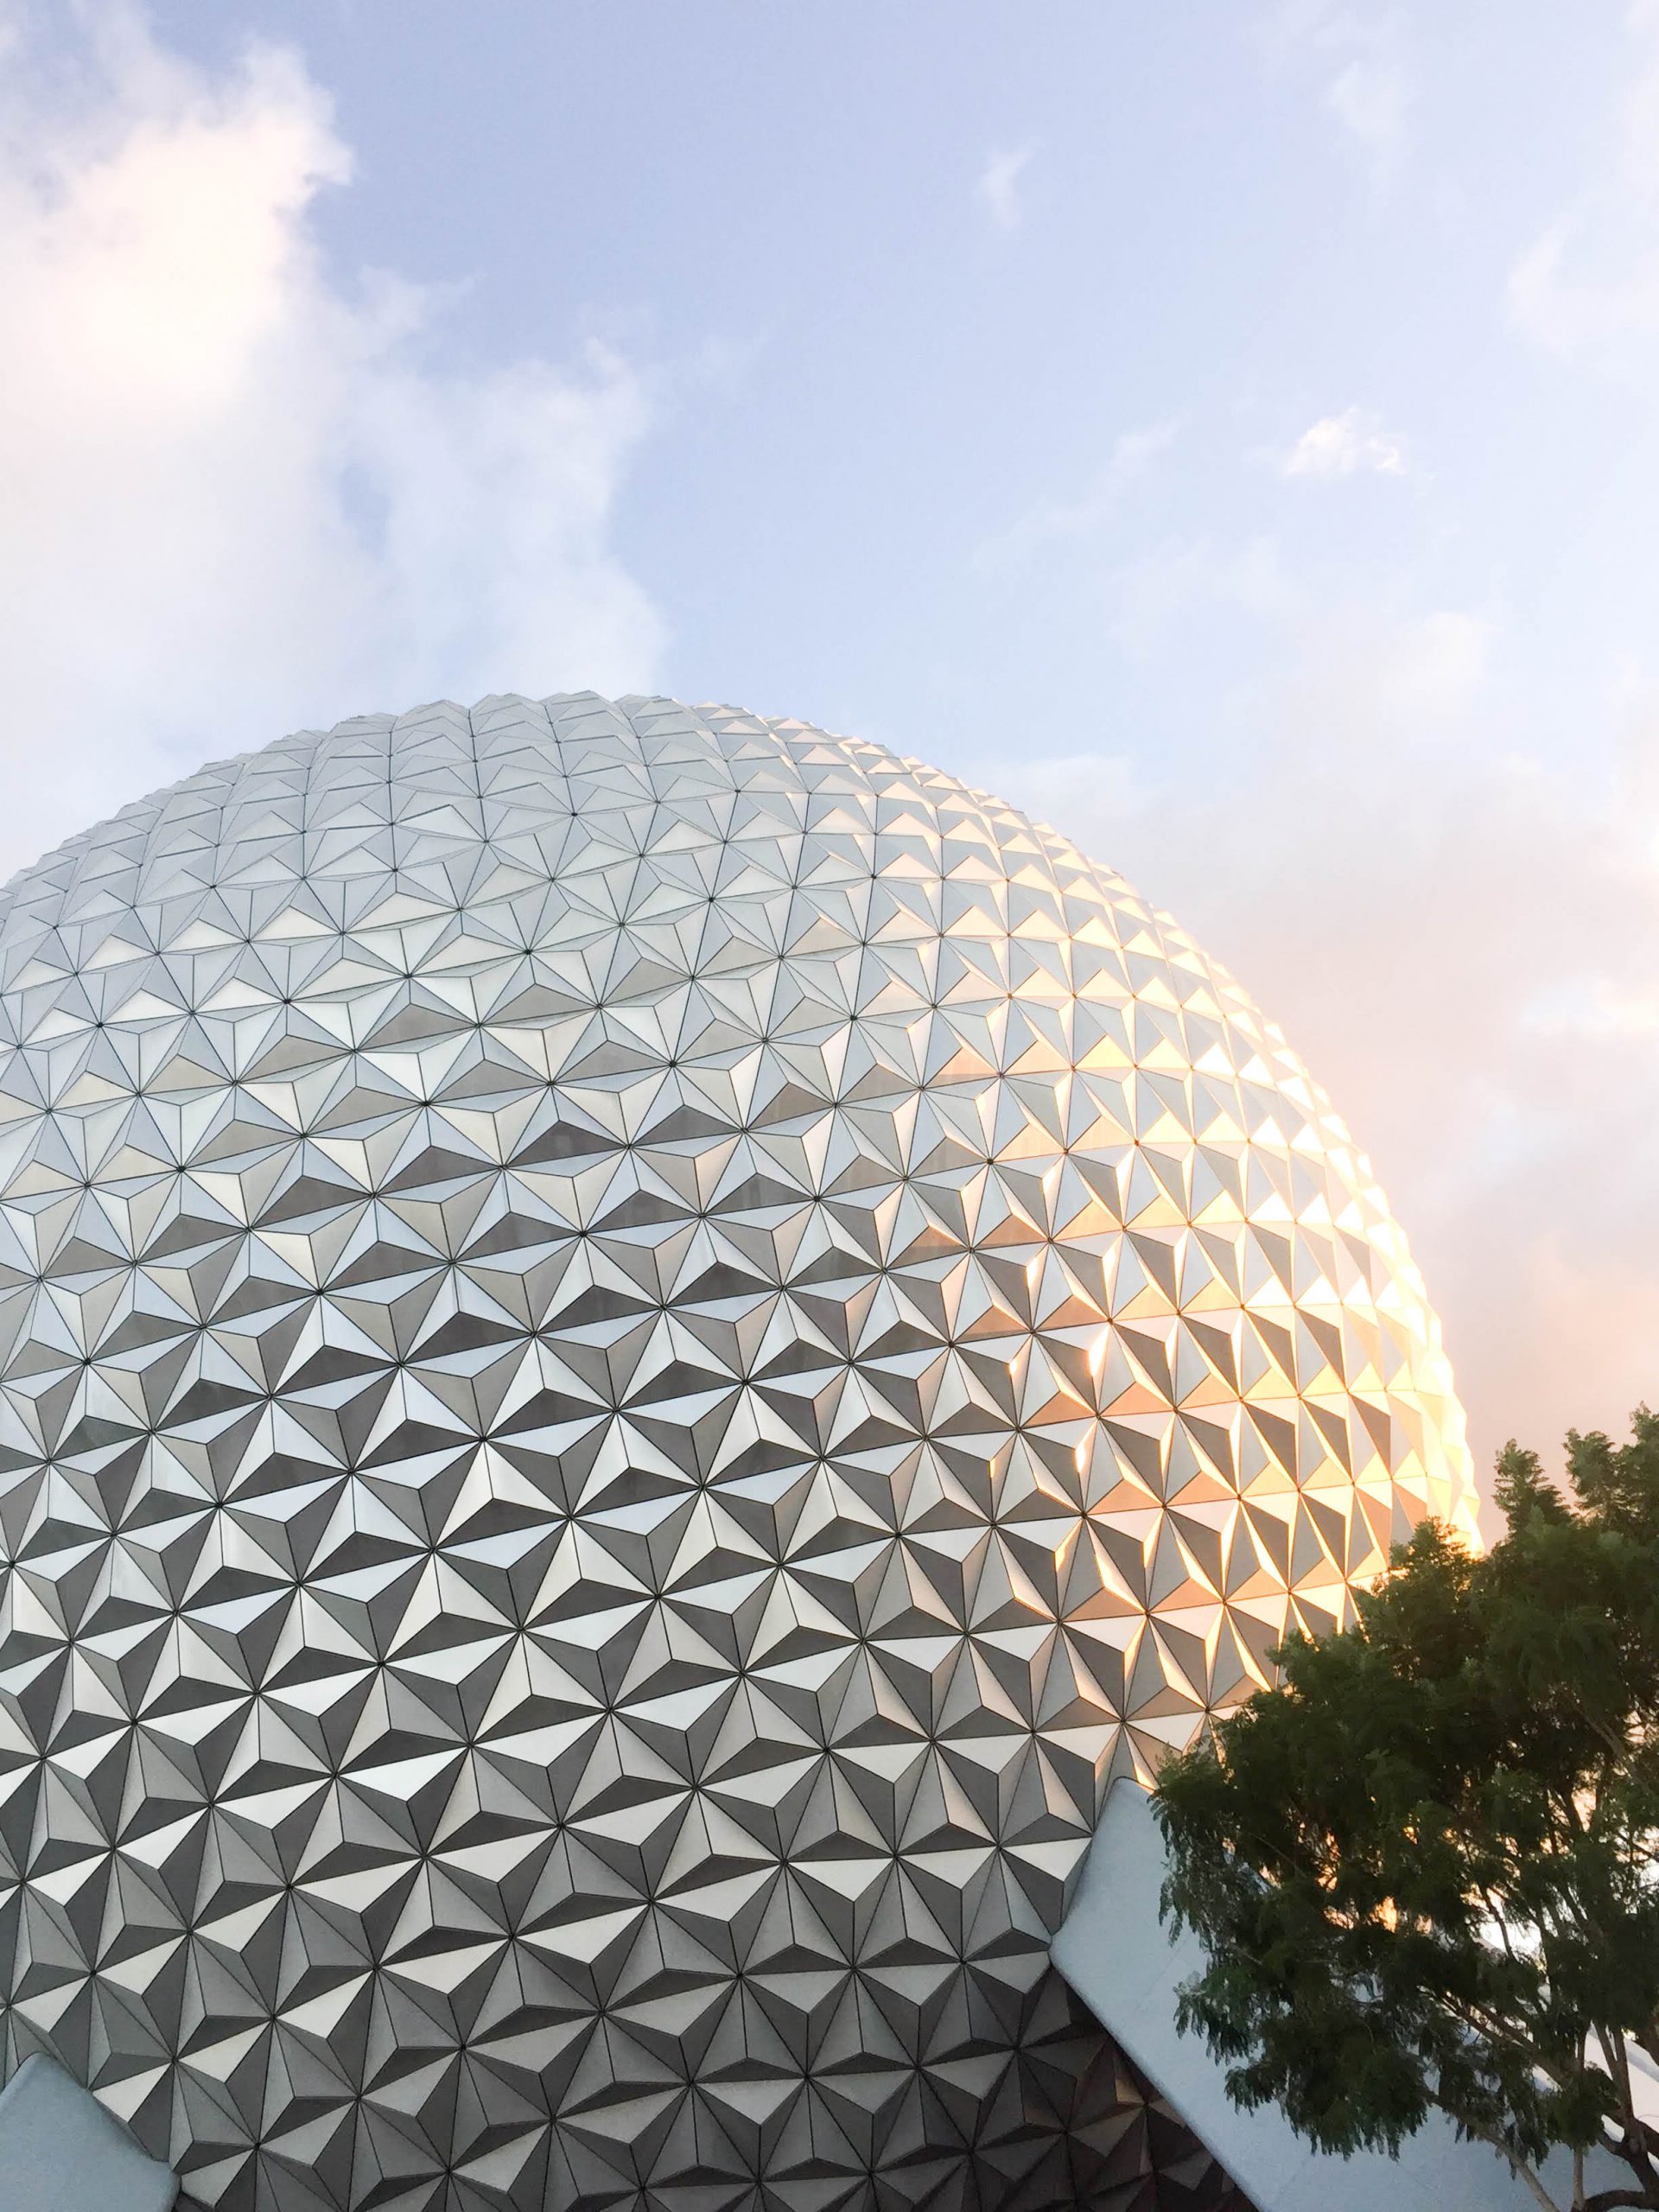 7 Fun Facts About the Epcot Ball - Disney With Dave's Daughters